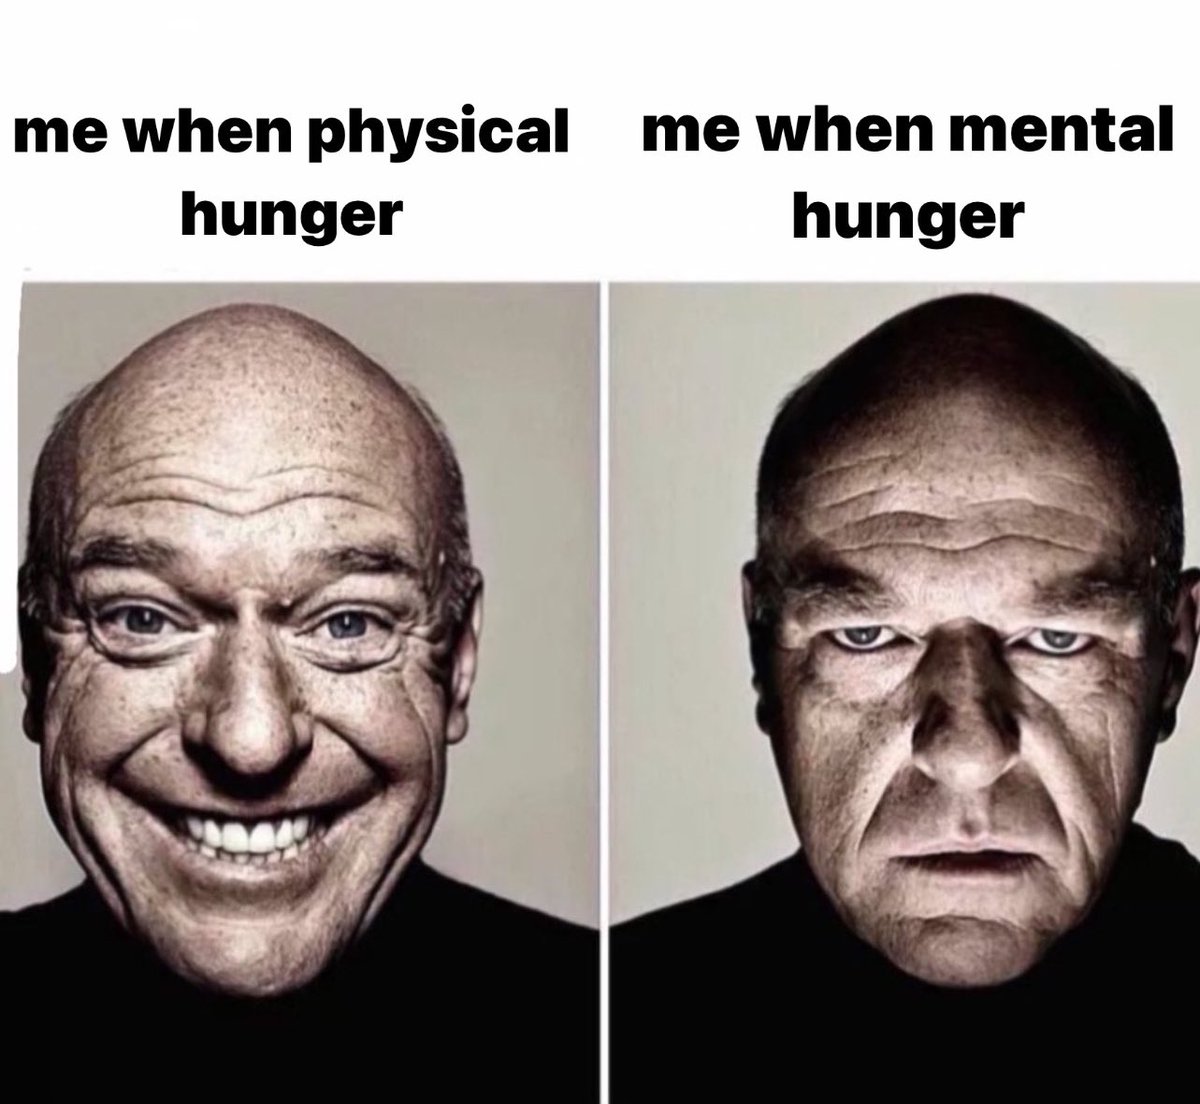 mental hunger is the worst